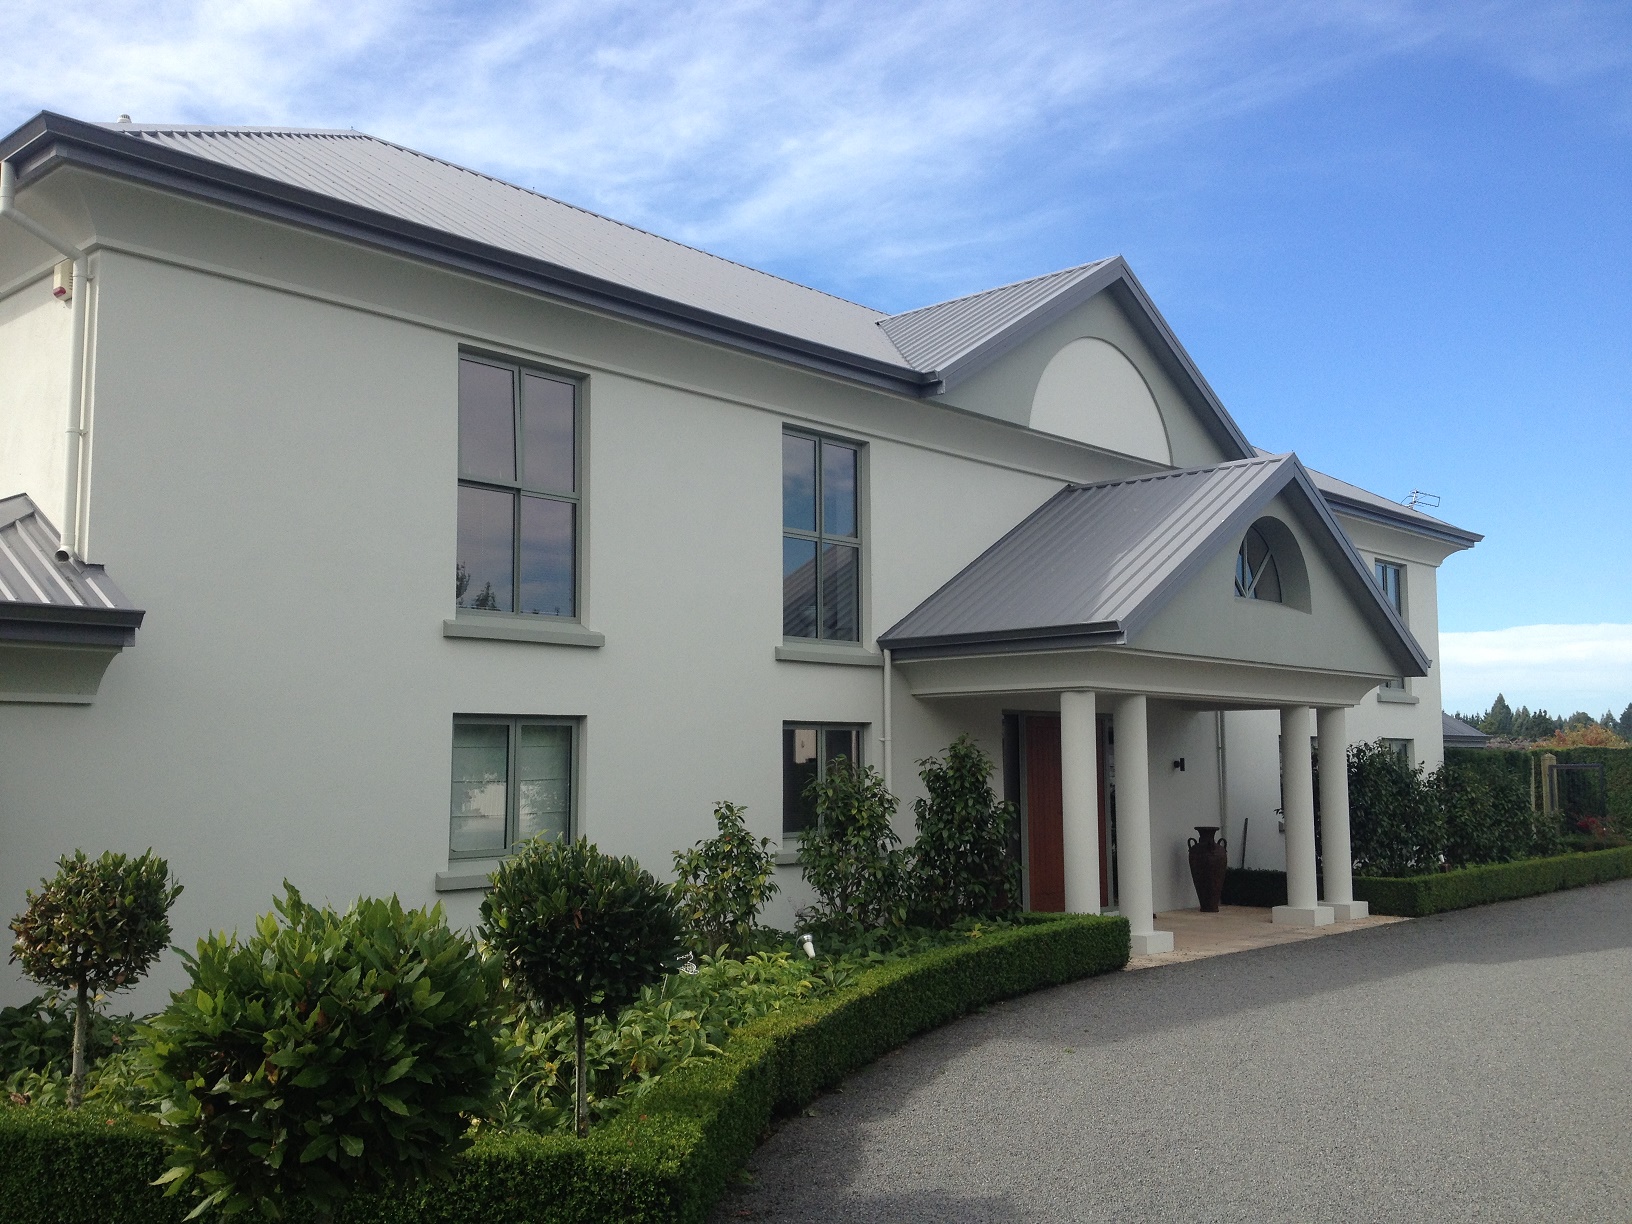 A1 Advanced Exterior Plastering. Commercial and Residential Christchurch and Canterbury Area